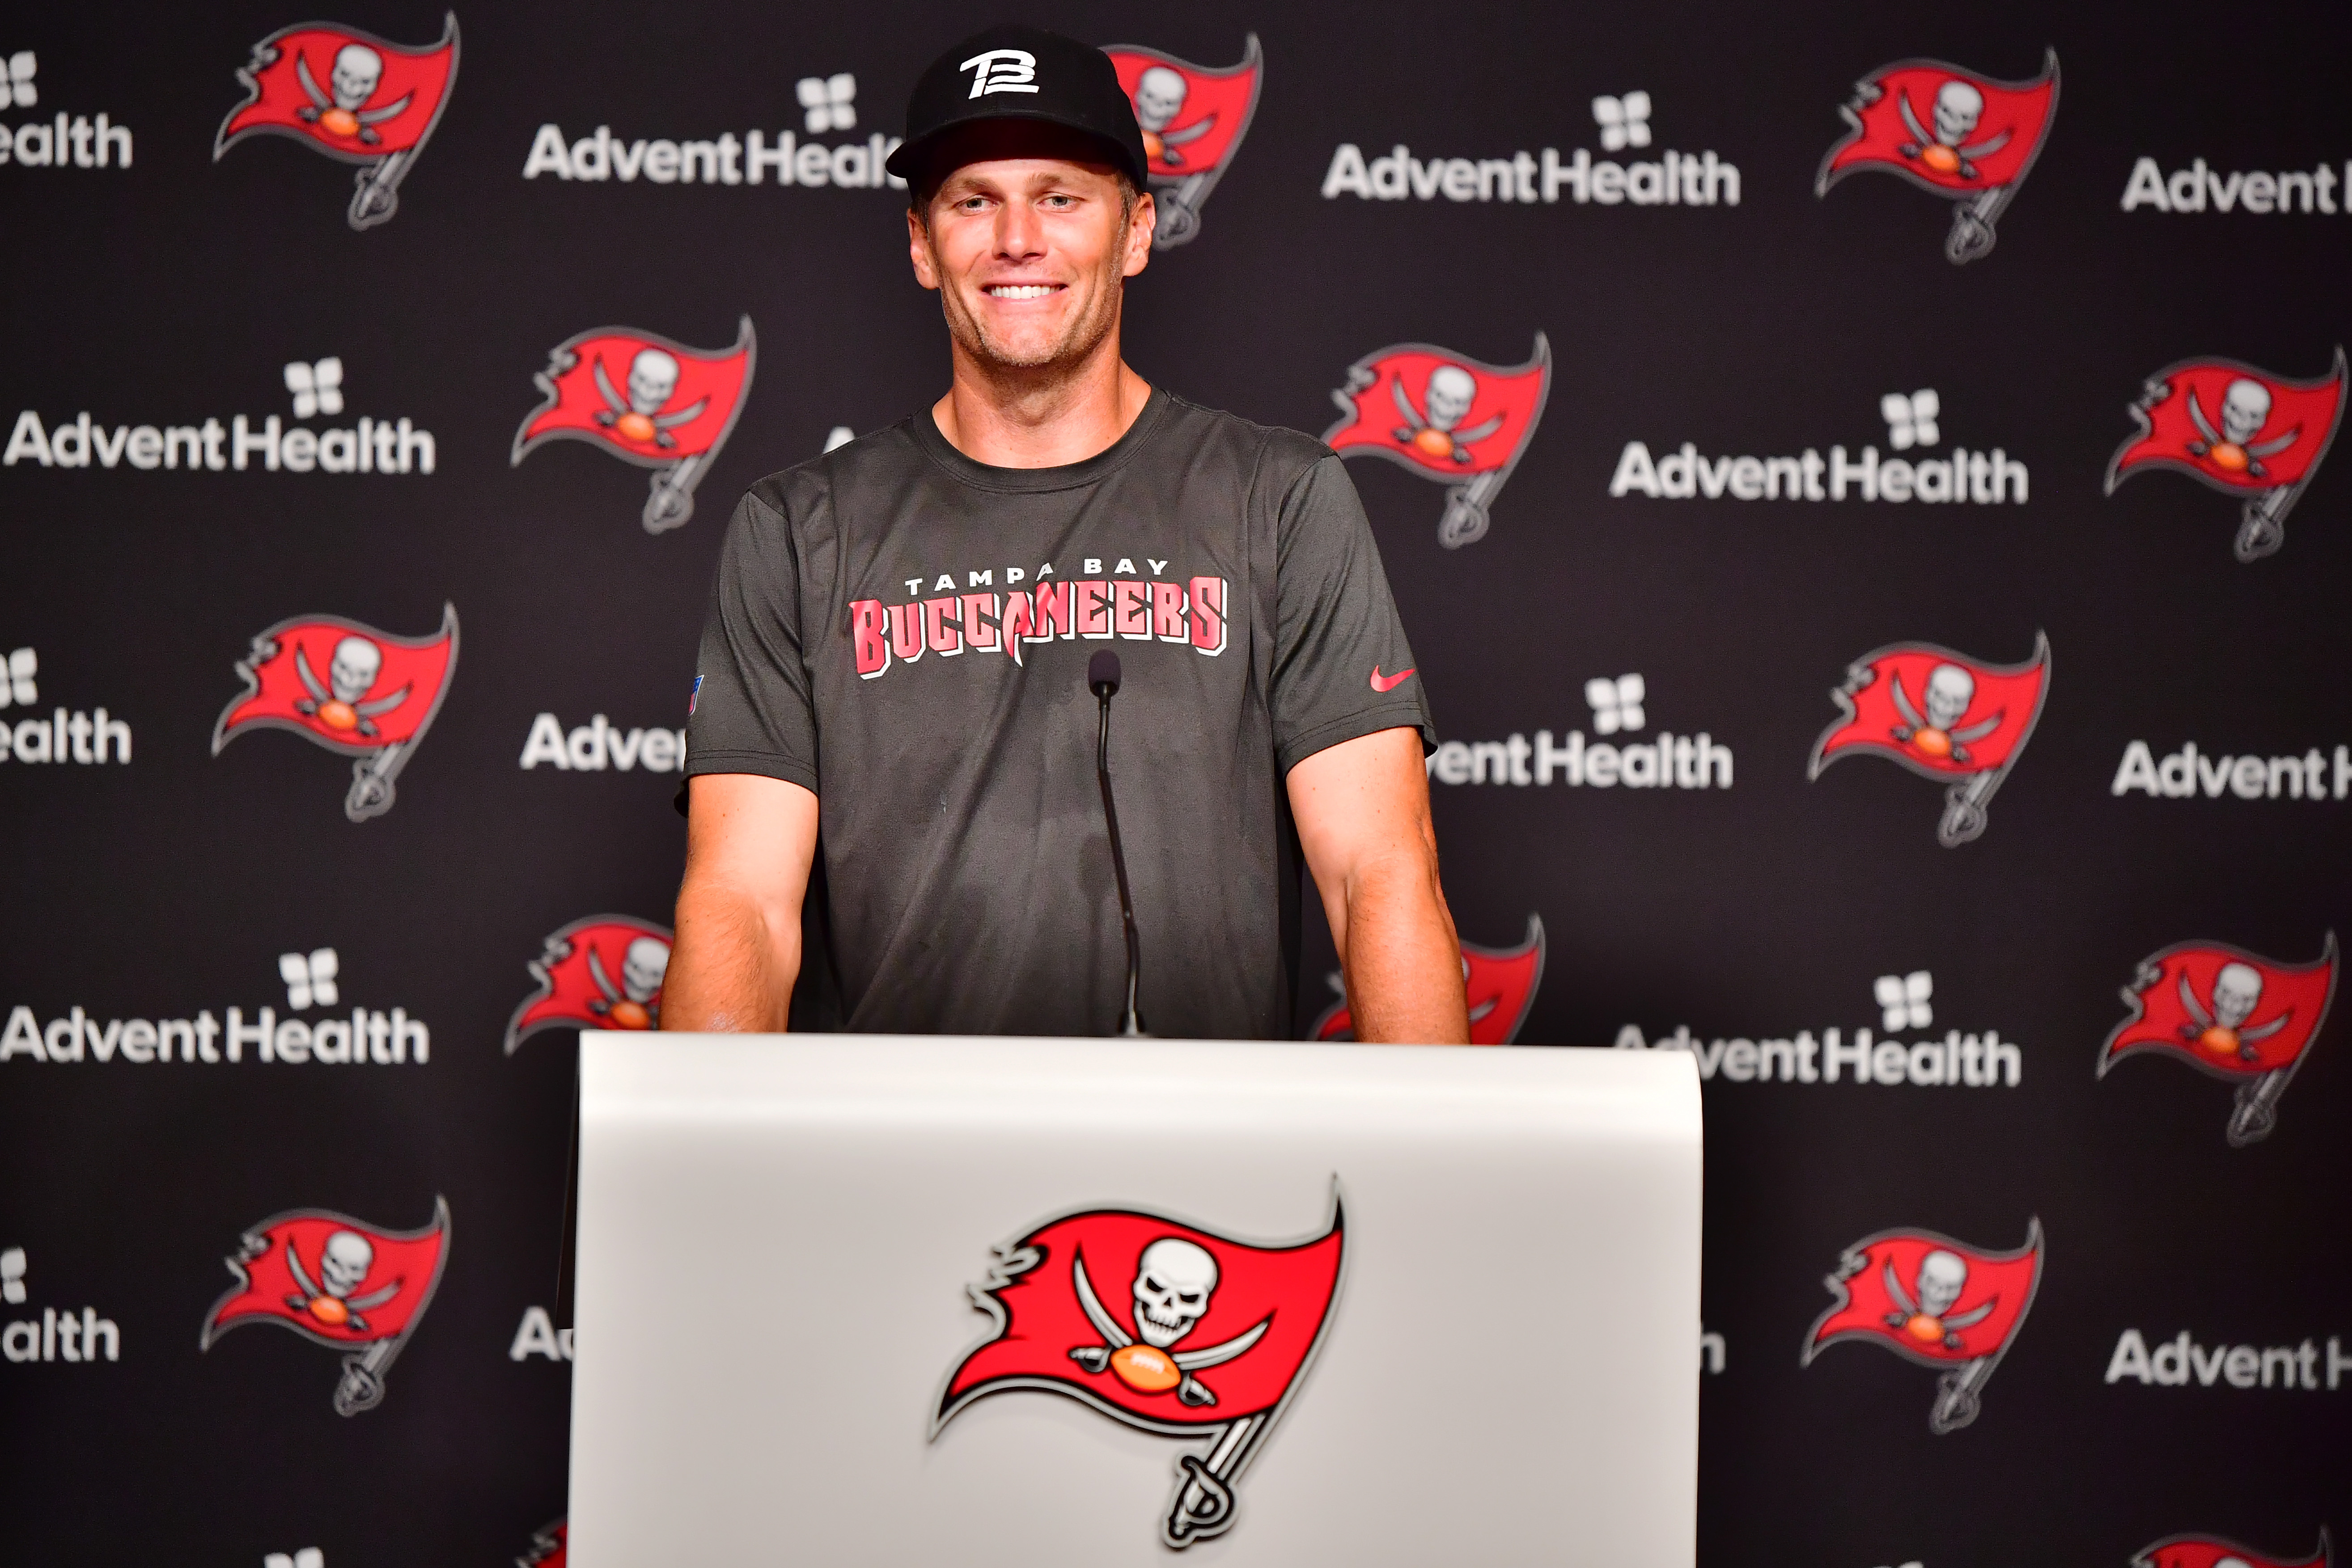 Tom Brady #12 of Tampa Bay Buccaneers answers questions at a press conference following the 2022 Buccaneers minicamp at AdventHealth Training Center on June 09, 2022 in Tampa, Florida.